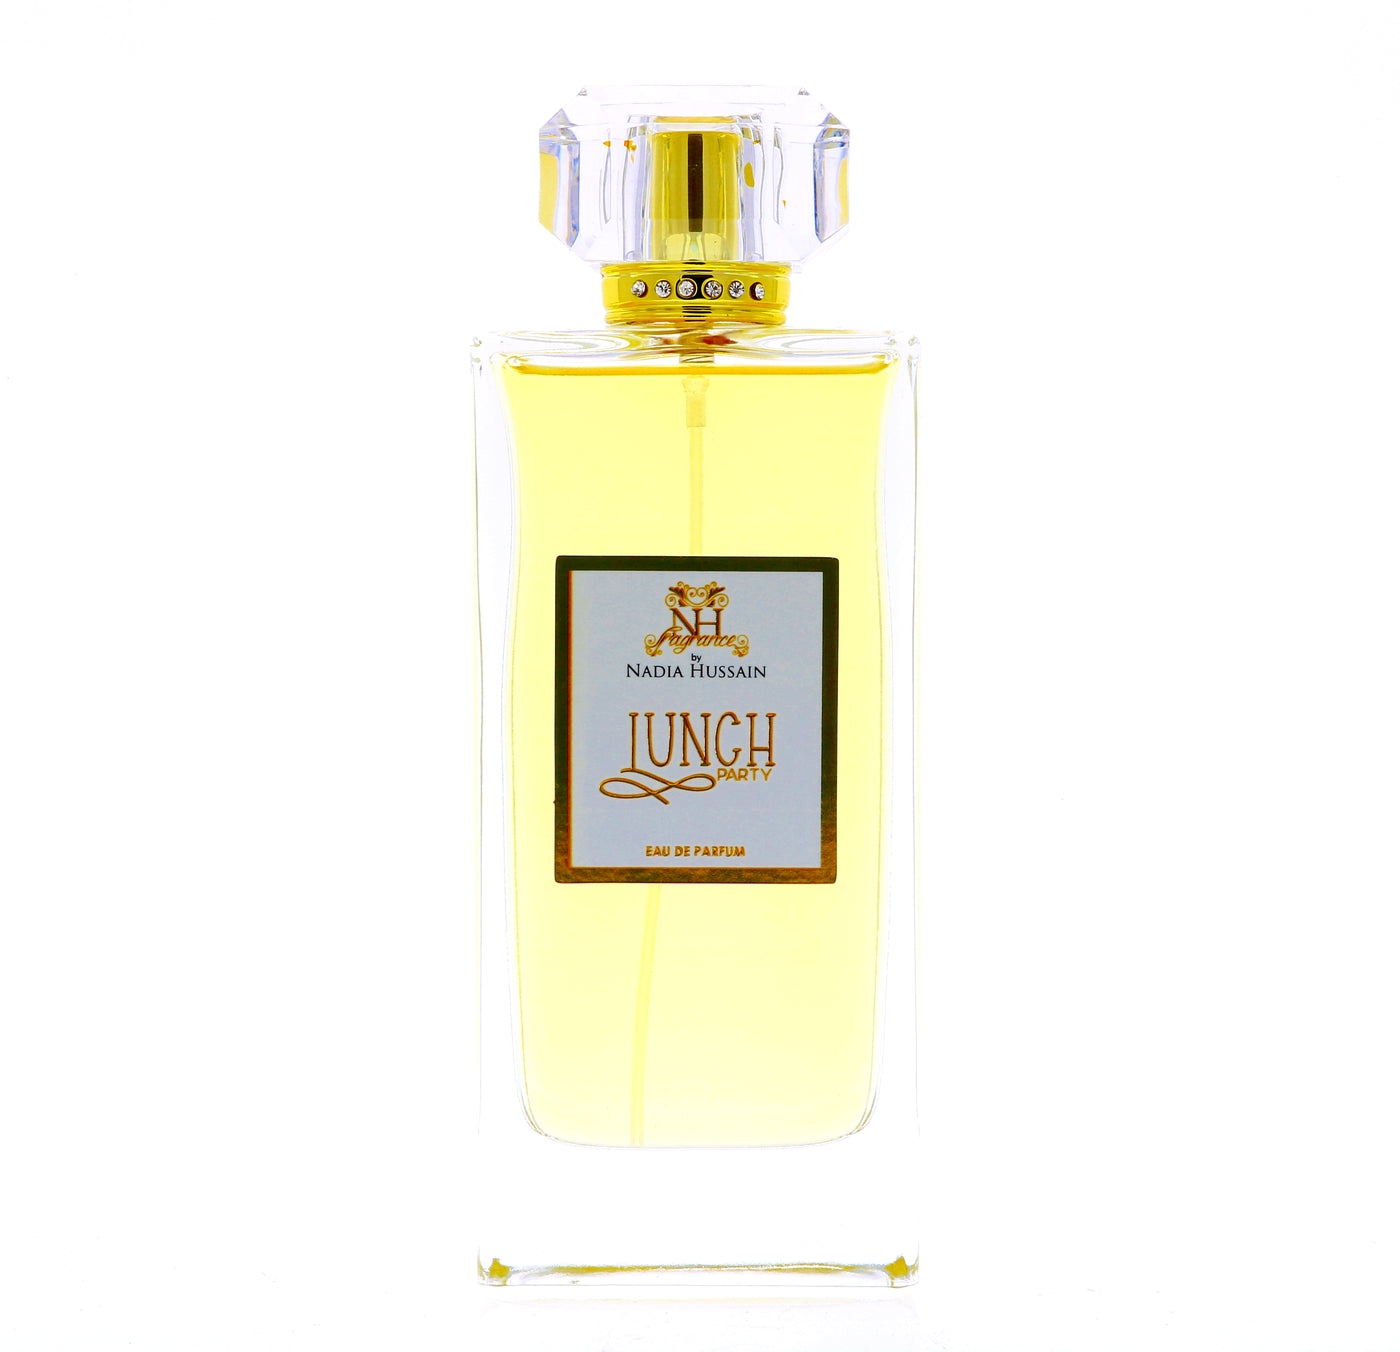 NADIA HUSSAIN Perfume Lunch Party 120mL-W